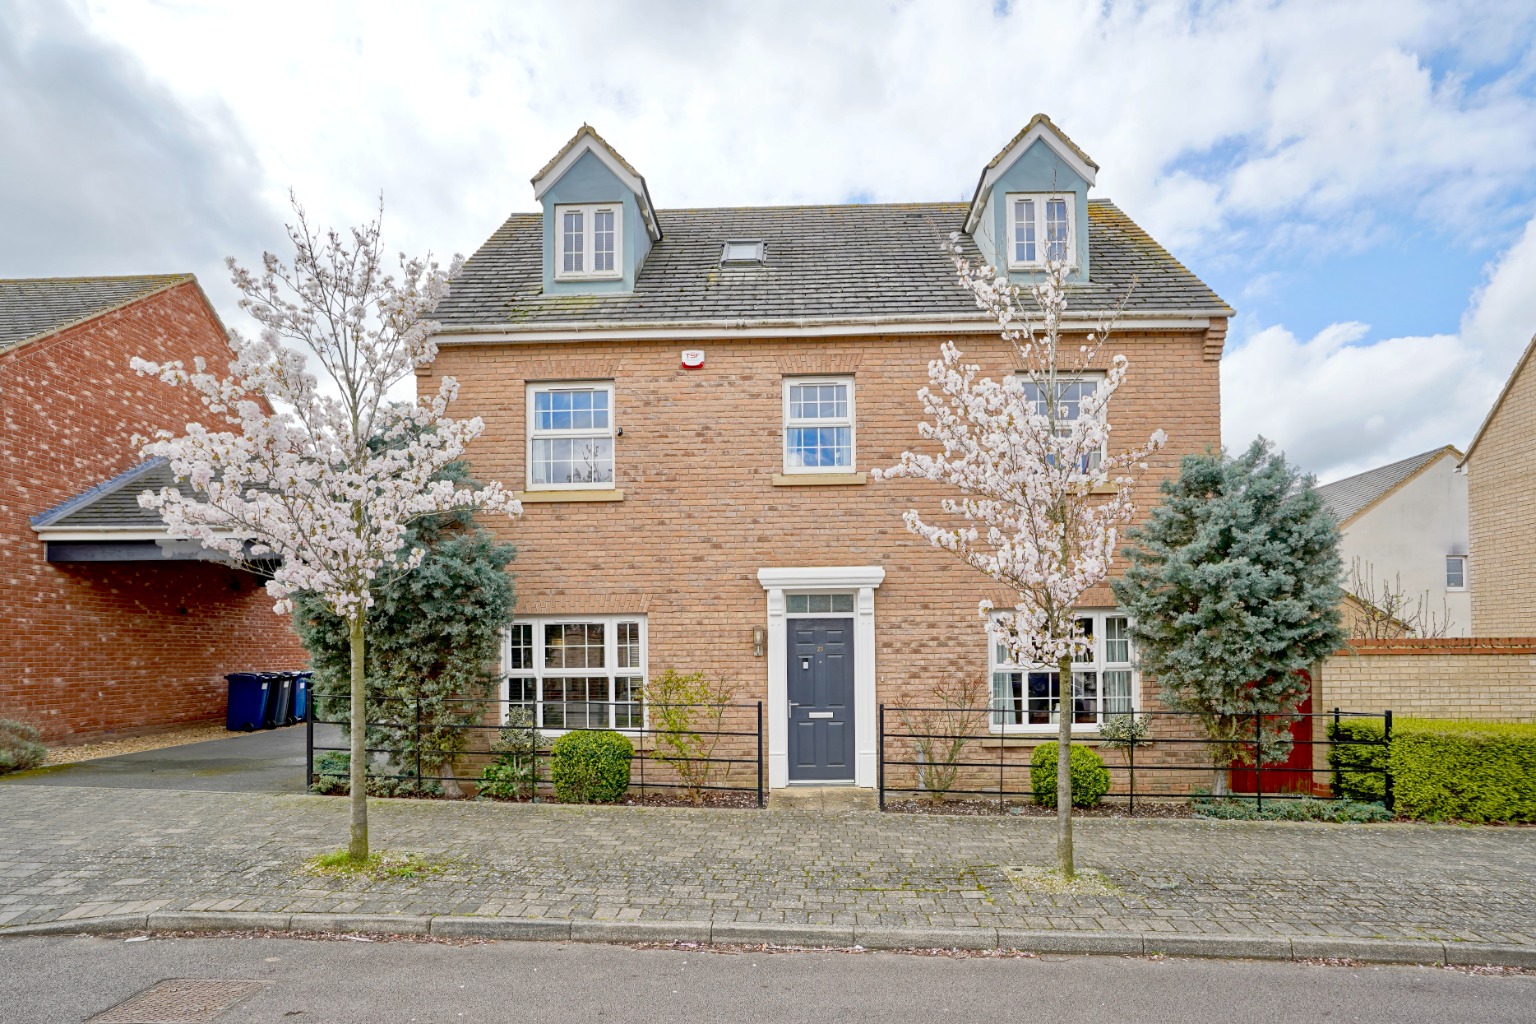 5 bed detached house for sale in Fox Brook, St Neots - Property Image 1